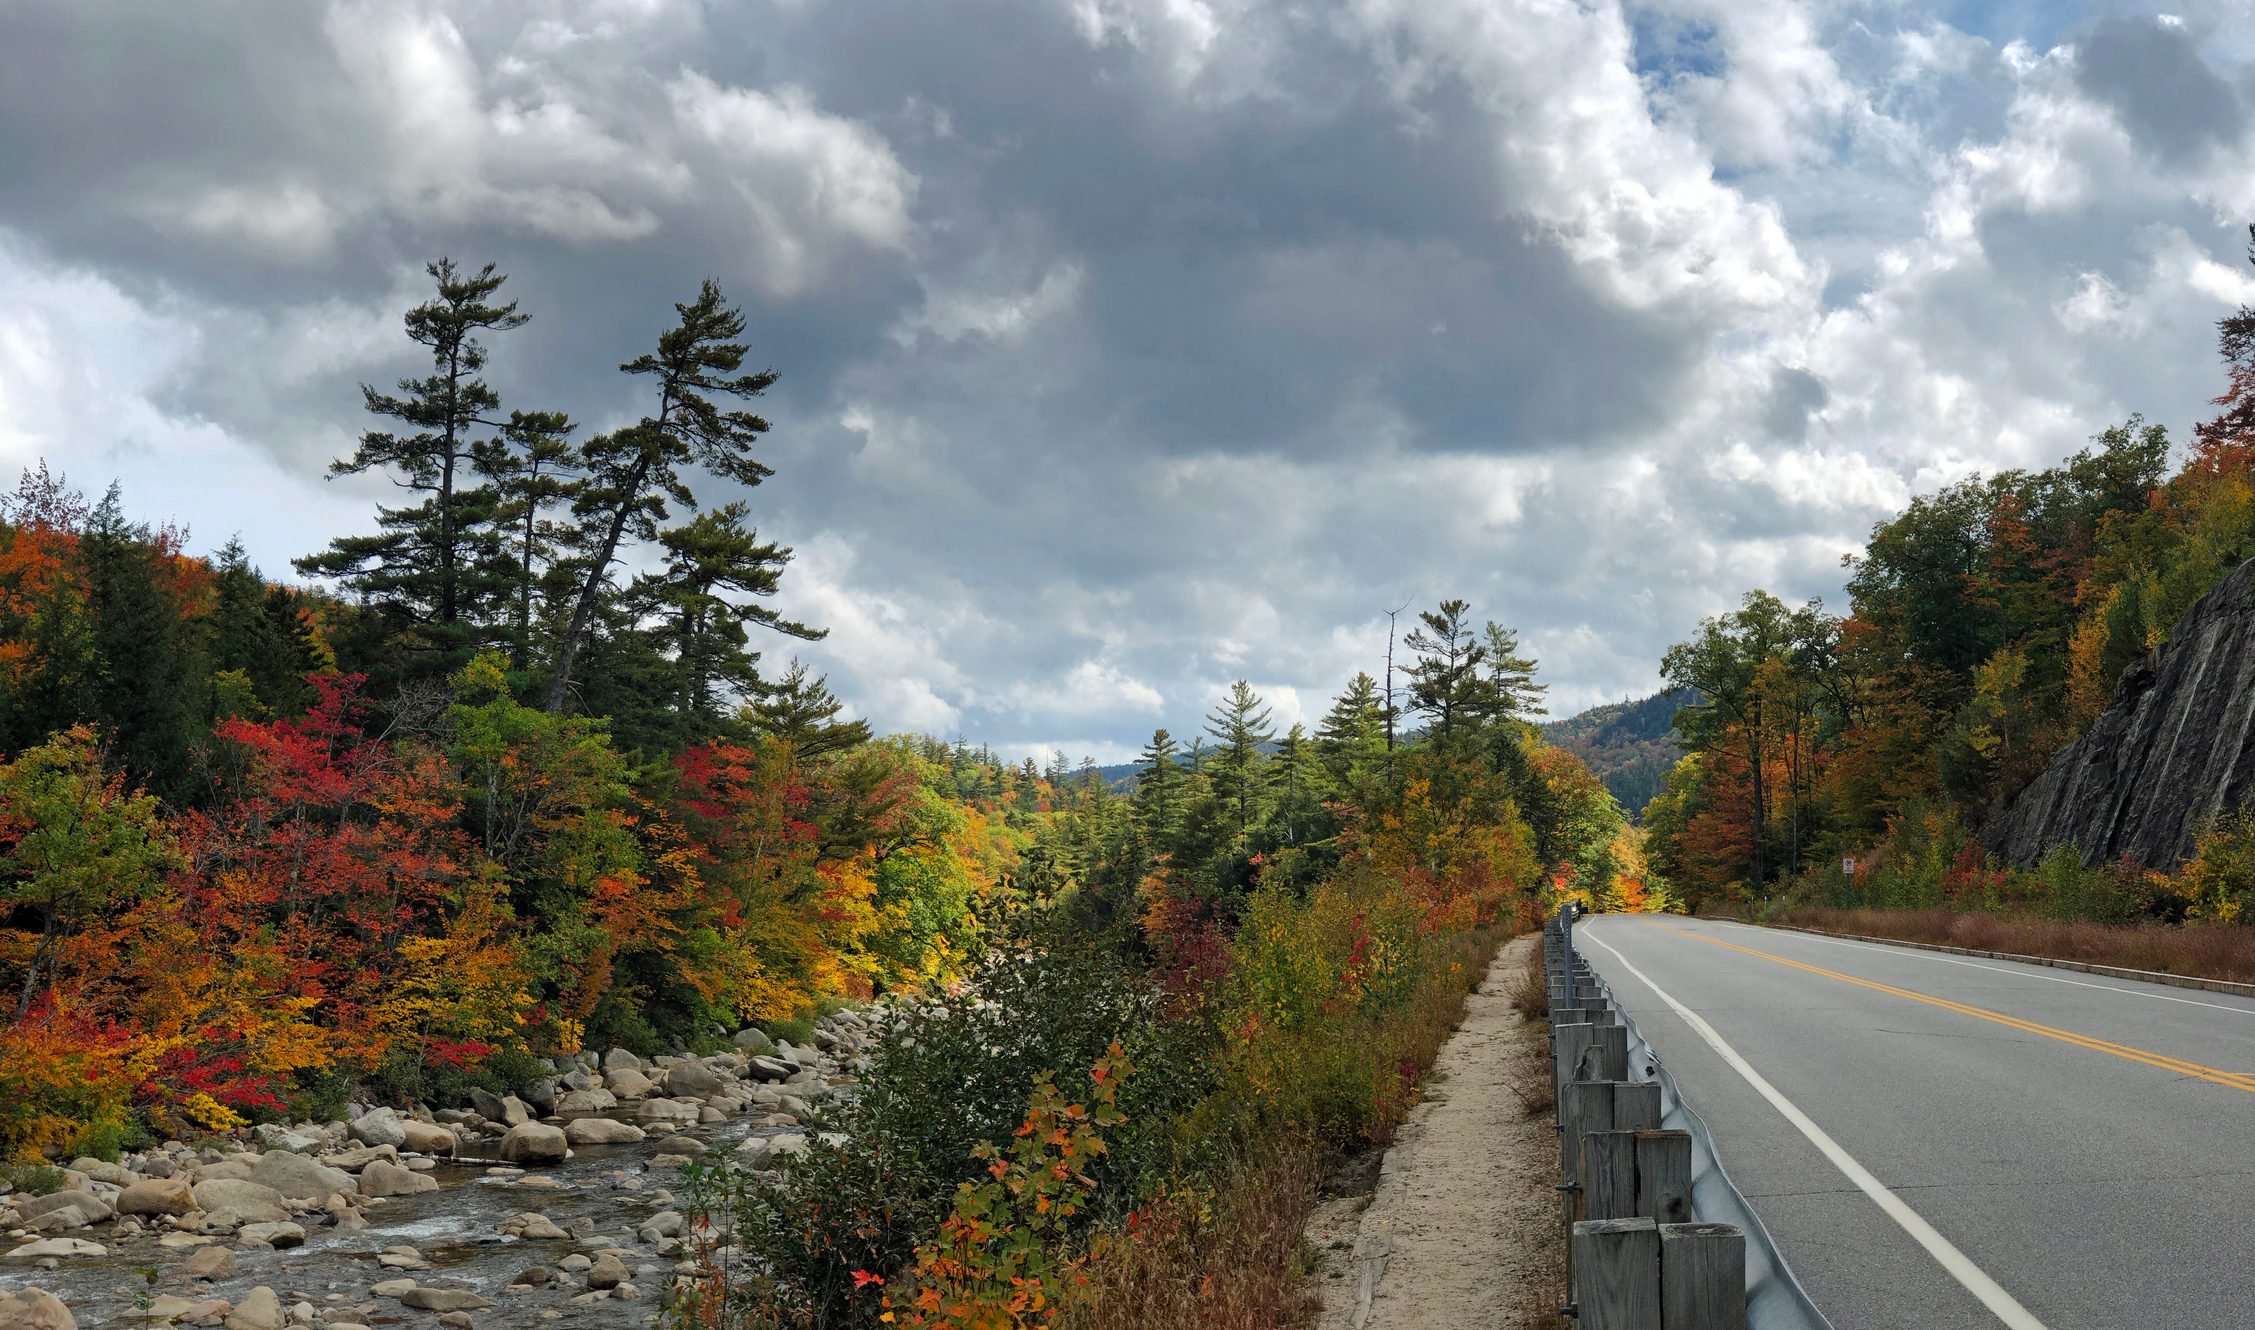 Kancamangus Highway in the New Hampshire White Mountains running alongside the Swift River during Autumn